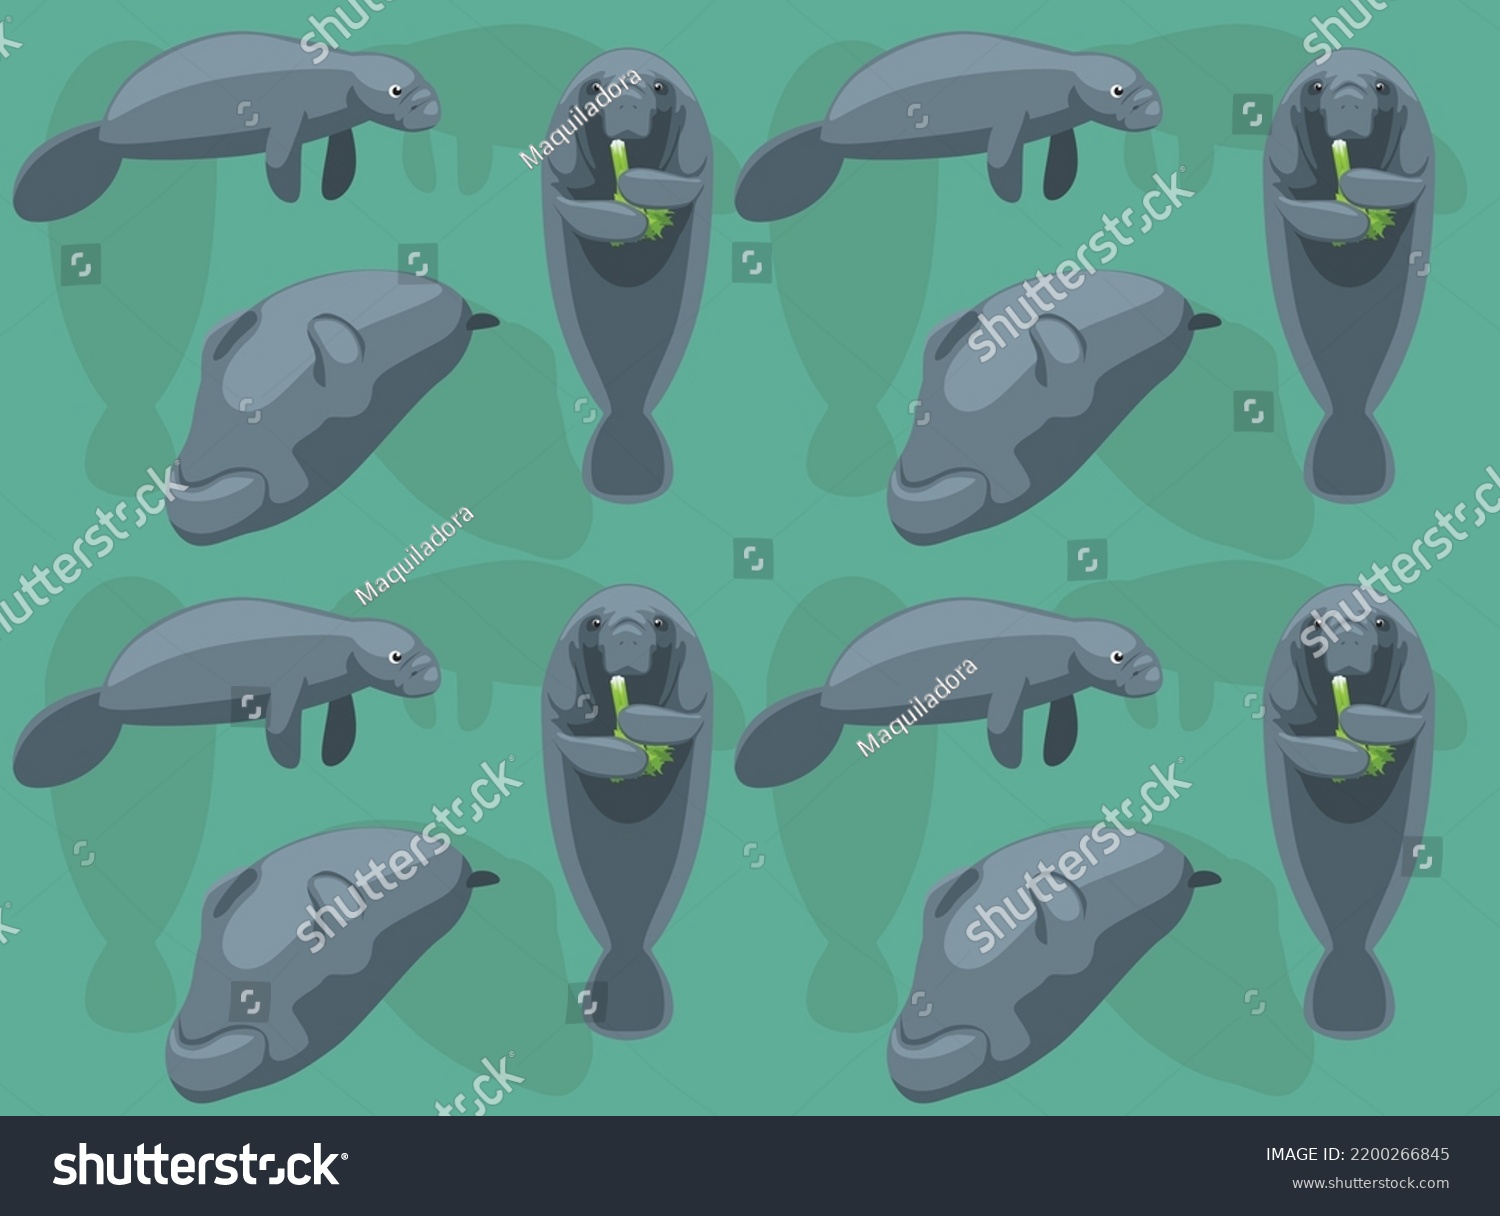 SVG of Animal Manatee Eating Poses Cute Cartoon Character Seamless Wallpaper Background
 svg